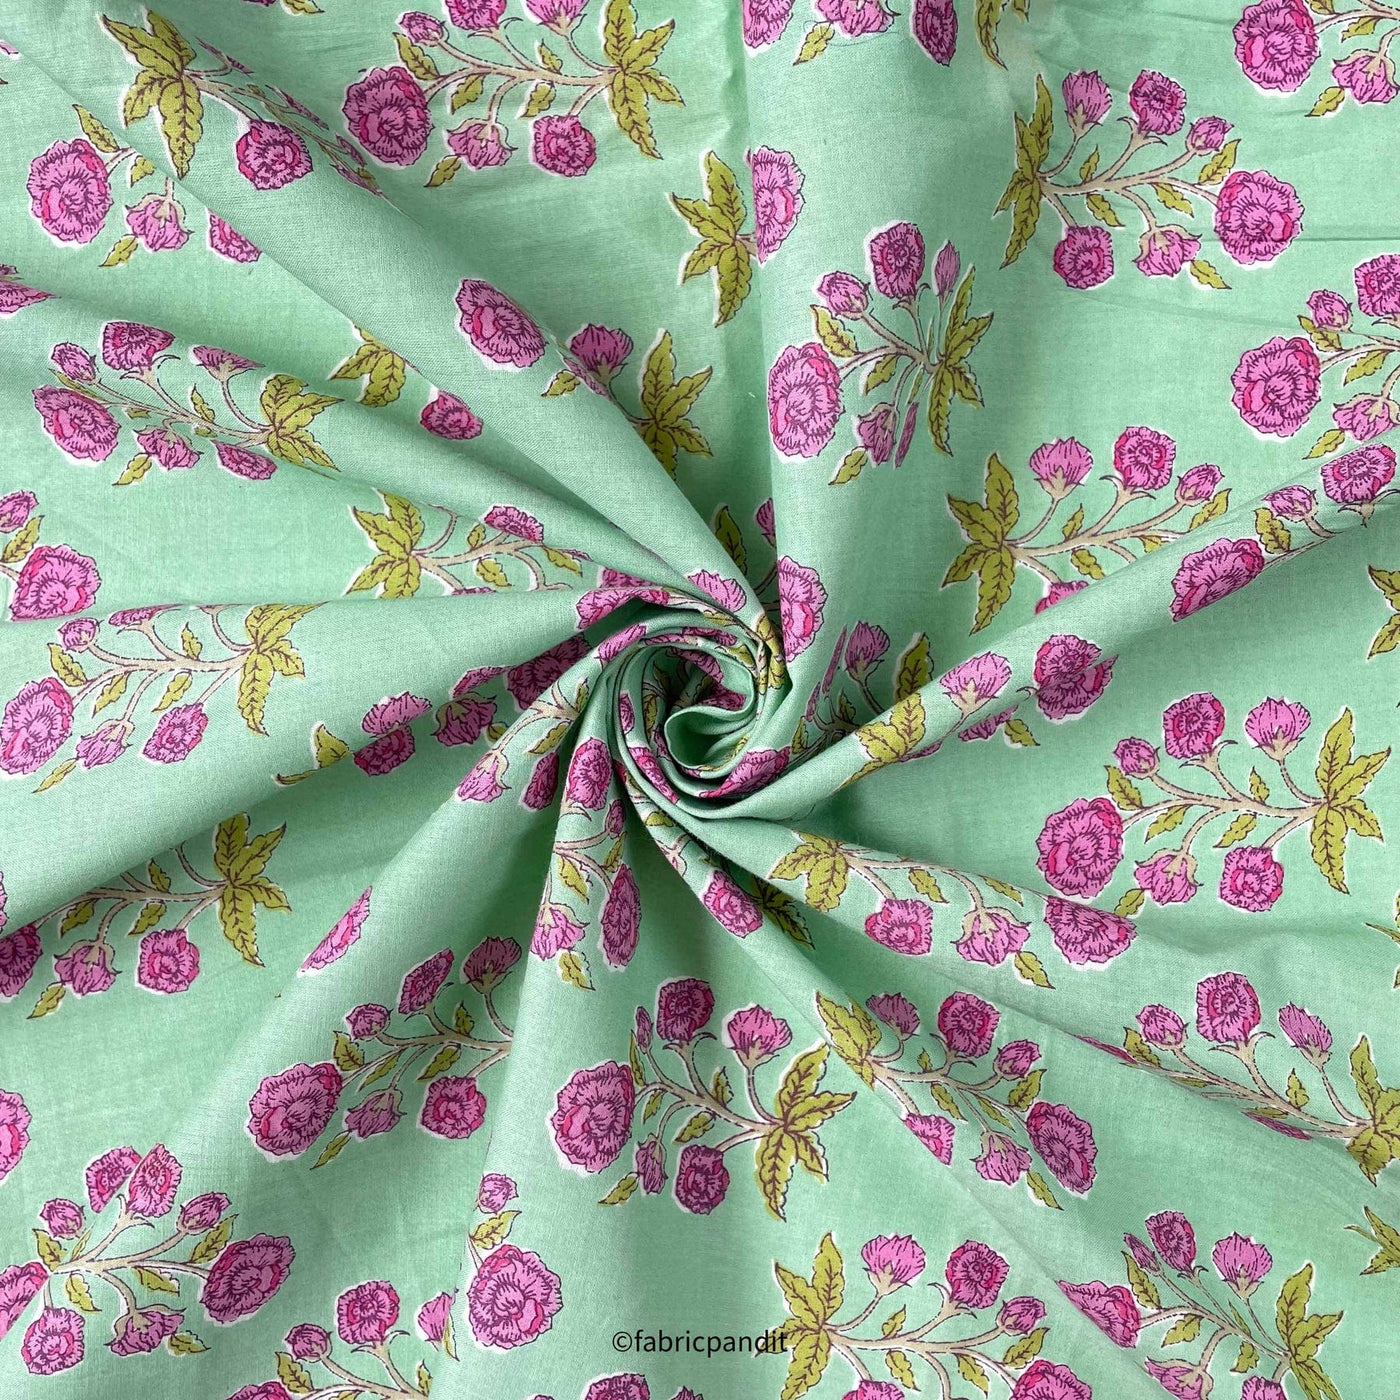 Fabric Pandit Fabric Turquoise & Magenta Floral Bunch Hand Block Printed Pure Cotton Fabric (Width 42 inches)